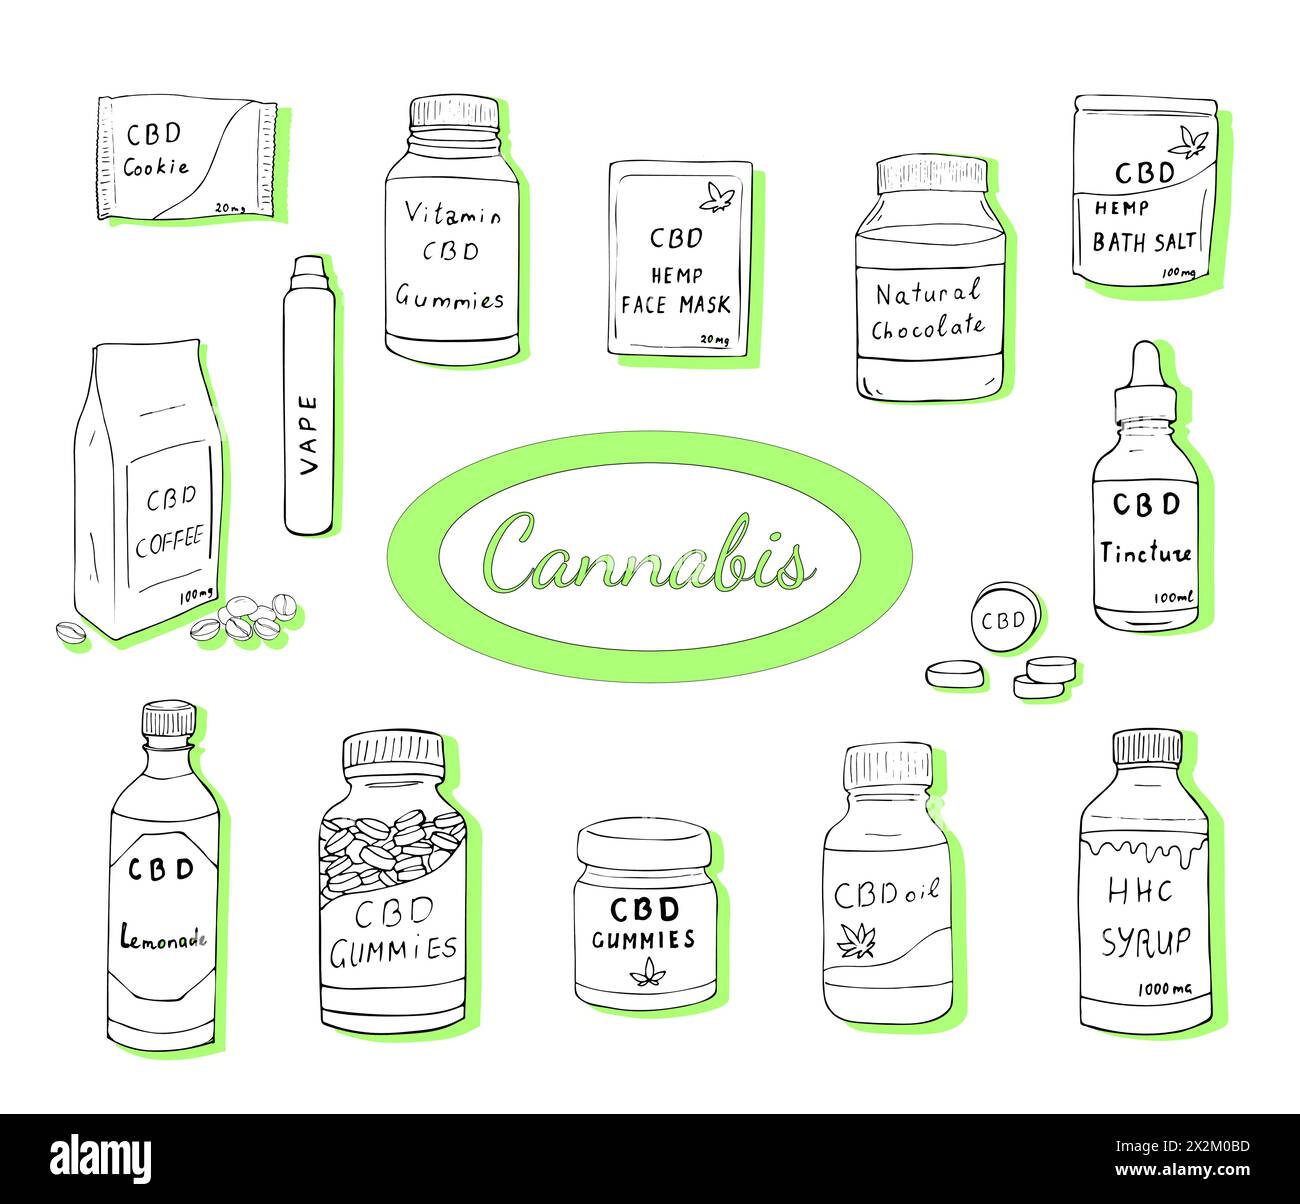 Cannabis outline icons vector set. Set of sketches for cannabis items, cbd coffee, face mask, pills, gummies, vitamins, tincture, cookies, bath sault, Stock Vector